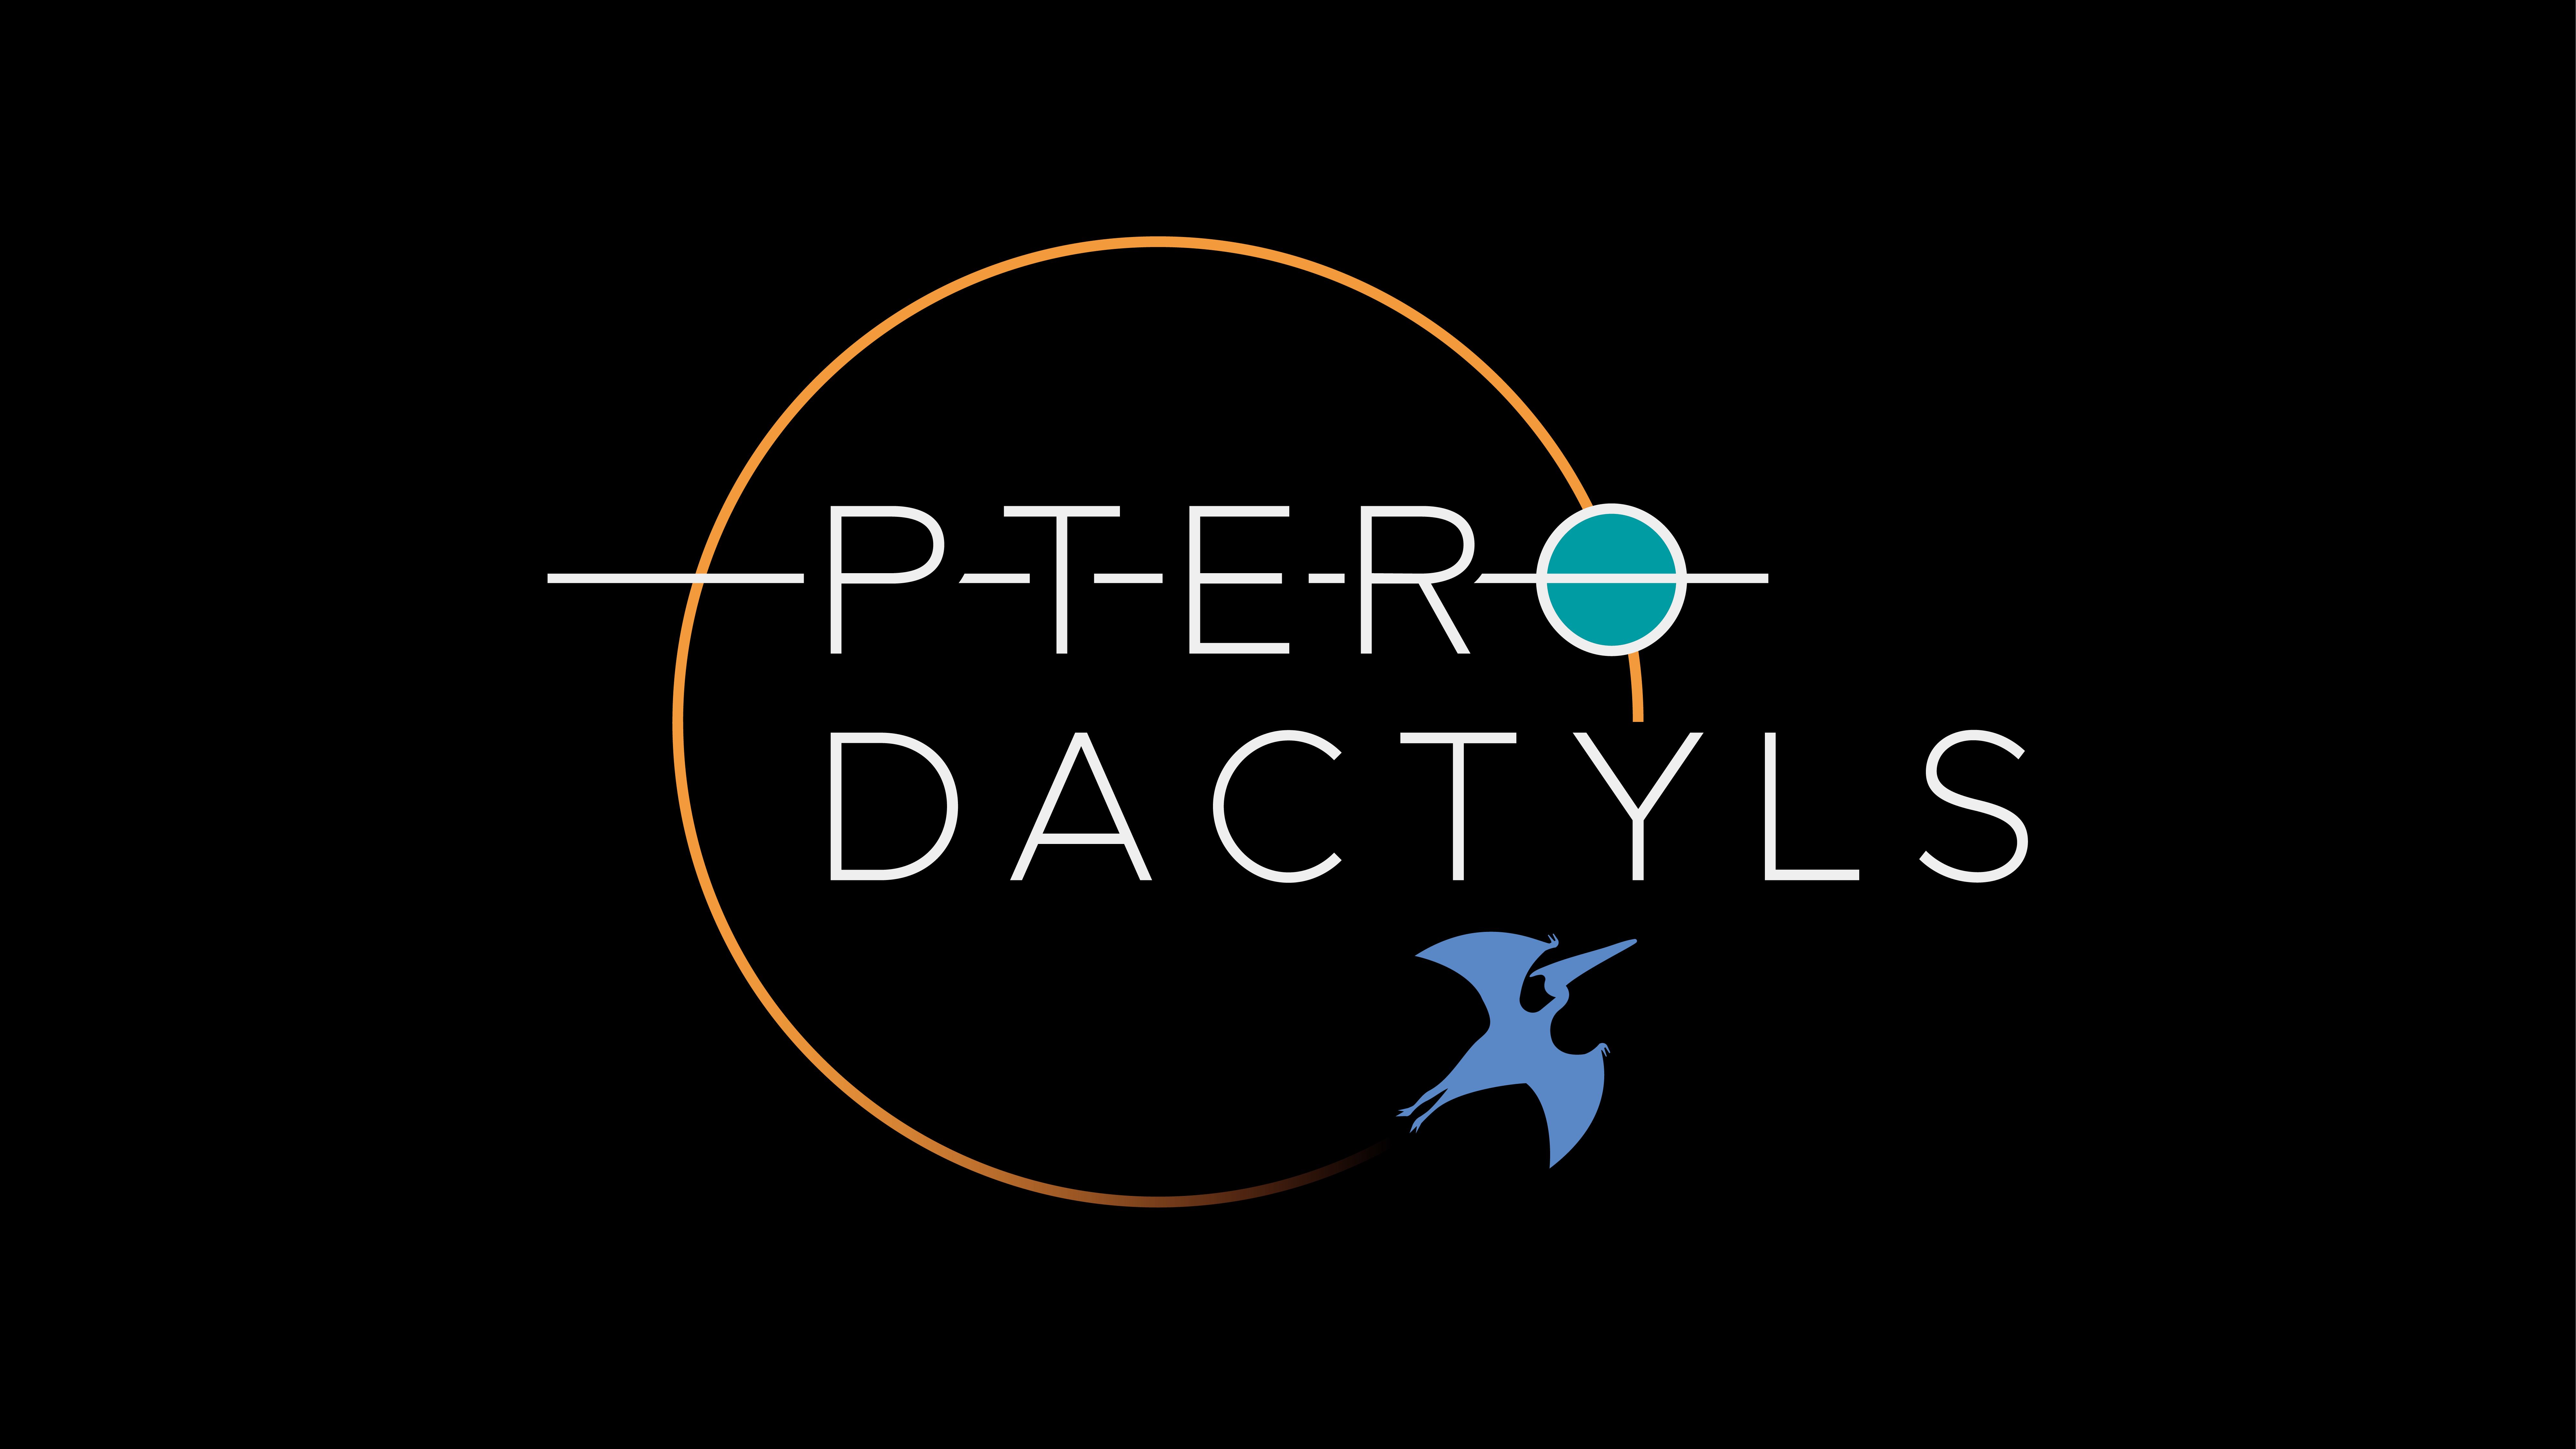 A logo for a Python package named 'pterodactyls,' with a horizontal bar going through the 'o' to represent a transit chord. The letters are set inside a larger orange circle representing a star, with a cartoon pterodactyl flying across it.